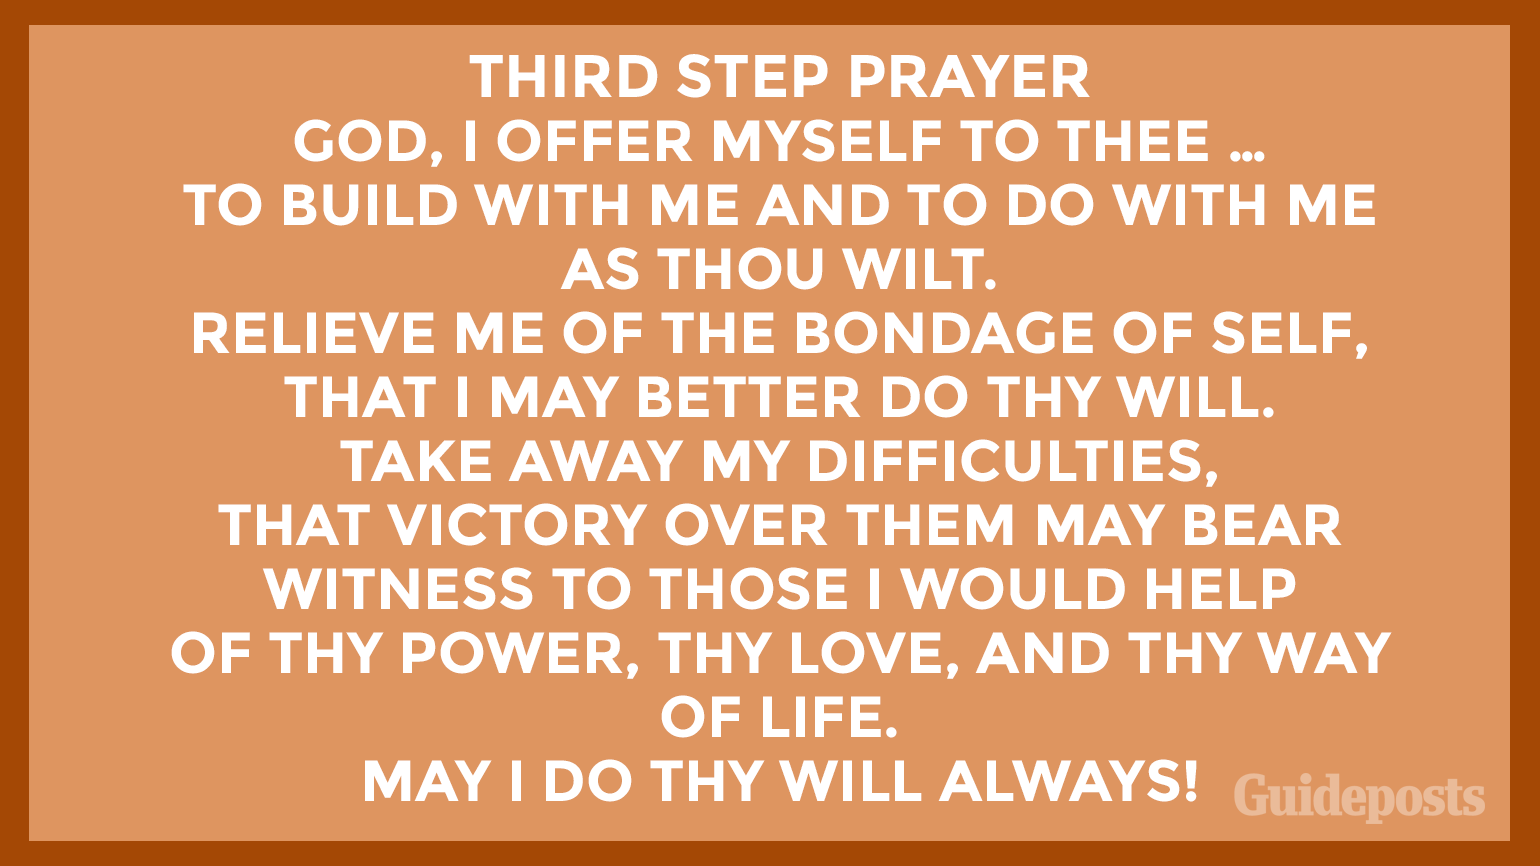 Third Step Prayer  God, I offer myself to Thee … to build with me and to do with me as Thou wilt. Relieve me of the bondage of self, that I may better do Thy will. Take away my difficulties, that victory over them may bear witness to those I would help of Thy Power, Thy Love, and Thy Way of life. May I do Thy will always!